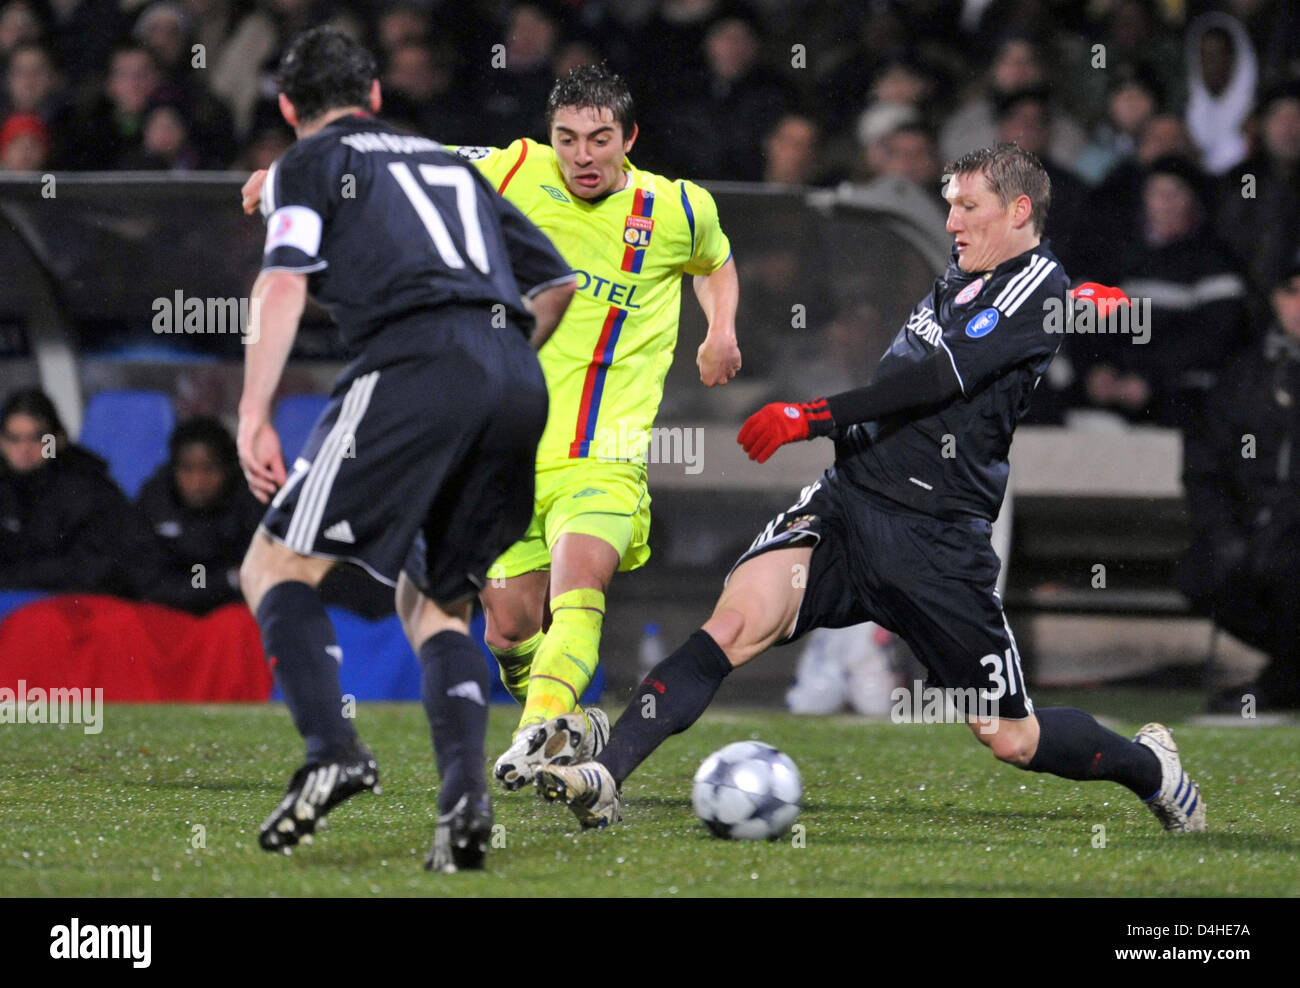 Anthony Mounier (C) of Olympique Lyon vies for the ball with FC Bayern Munich players Mark van Bommel (L) and Bastian Schweinsteiger (R) during the Champions League Group F match at Stade de Gerland in Lyon, France, 10 December 2008. Bayern Munich defeated Lyon 3-2 securing the first place in UEFA Champions League Group F. Photo: Andreas Gebert Stock Photo